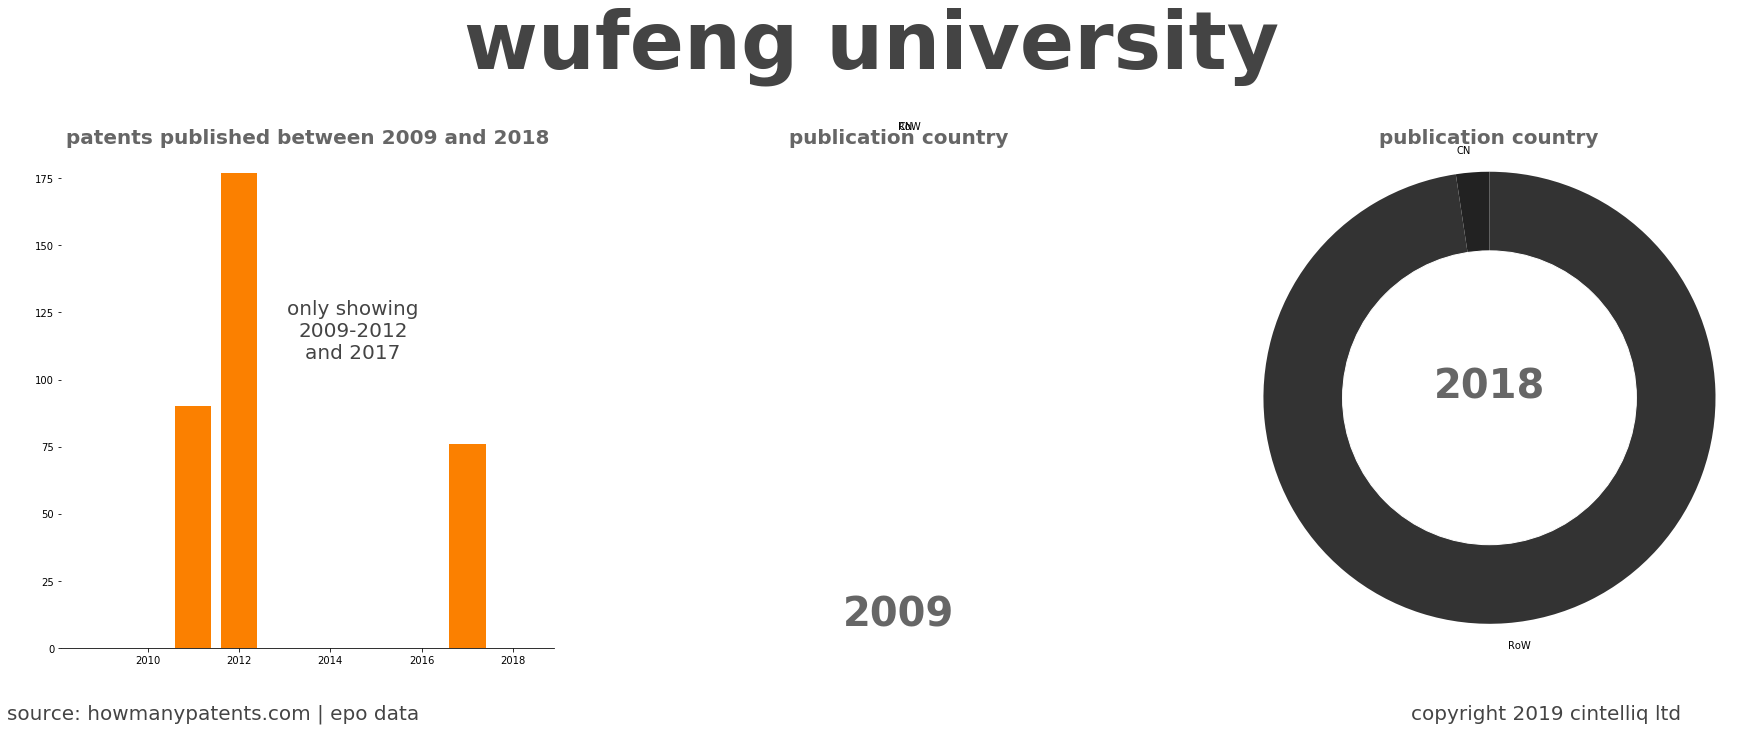 summary of patents for Wufeng University